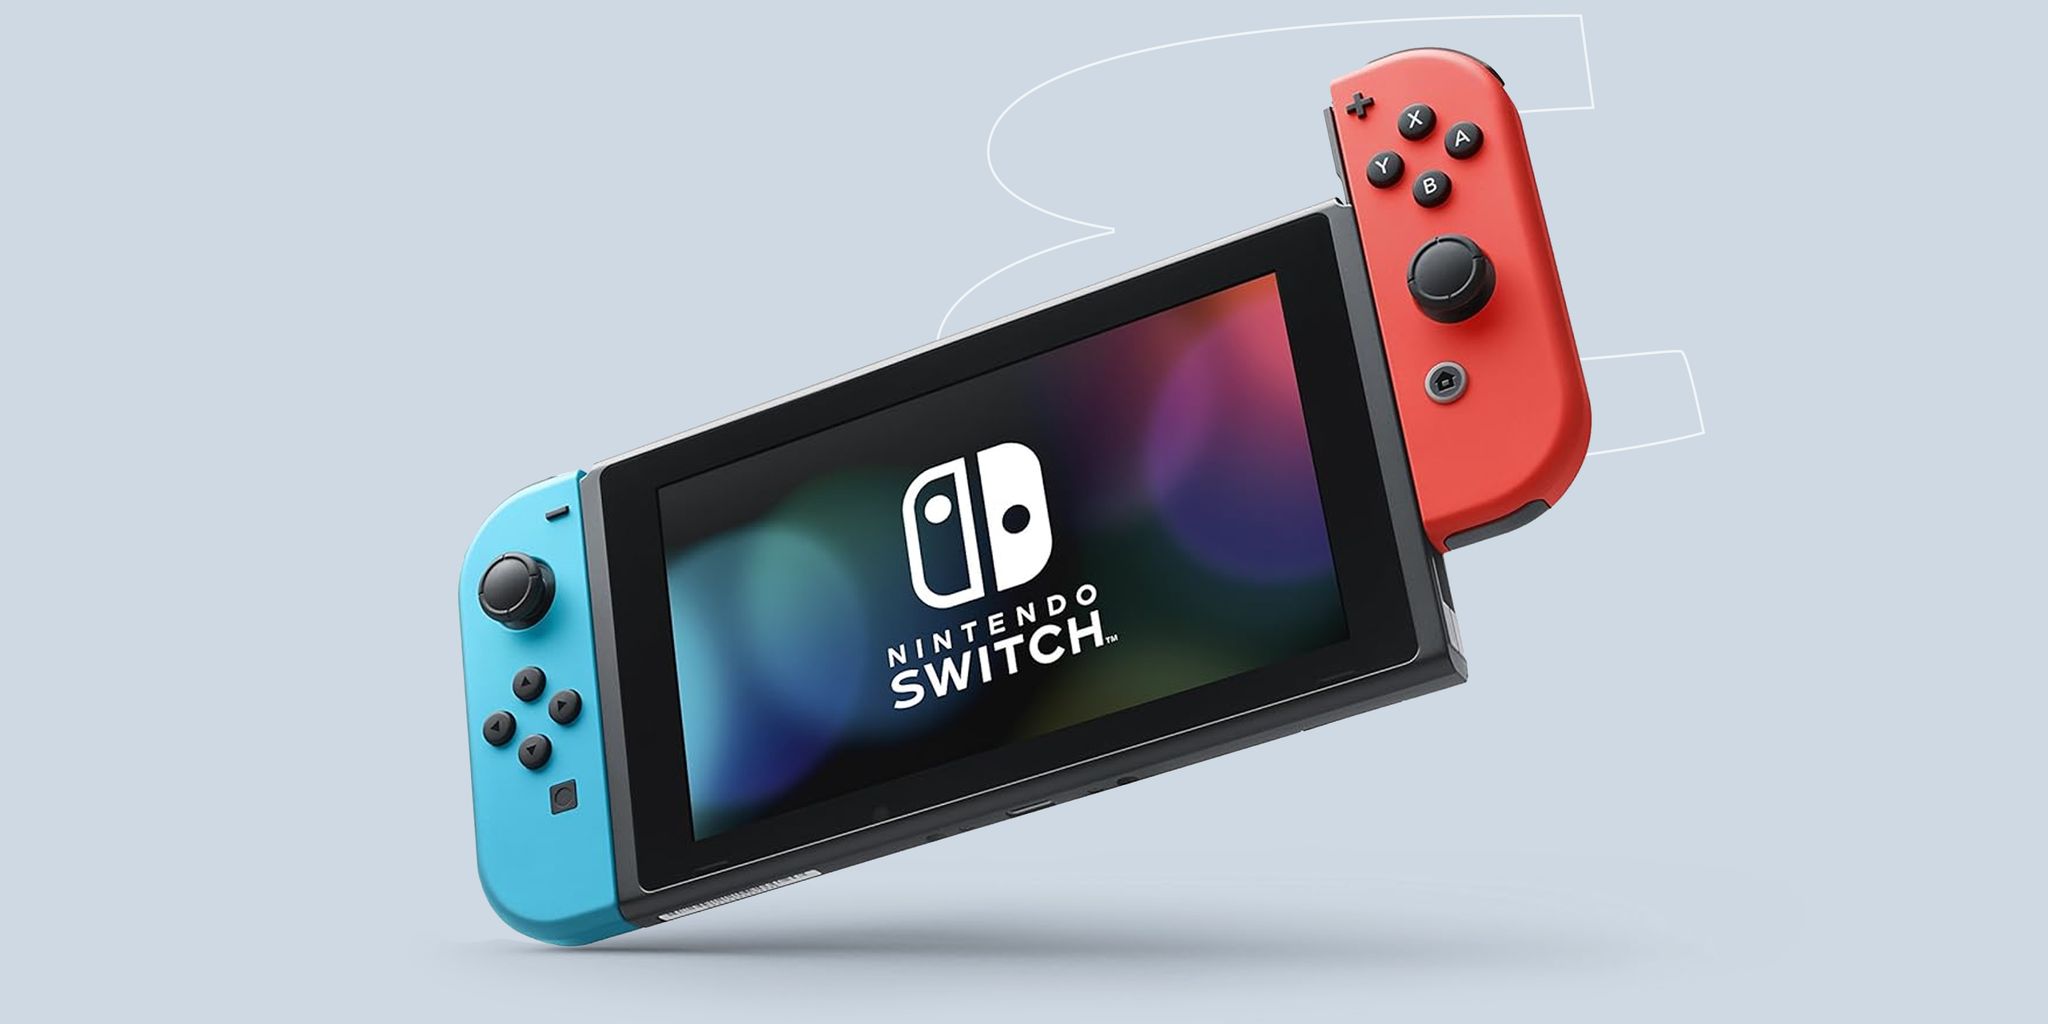 Shop Holiday Deals on Nintendo Switch 